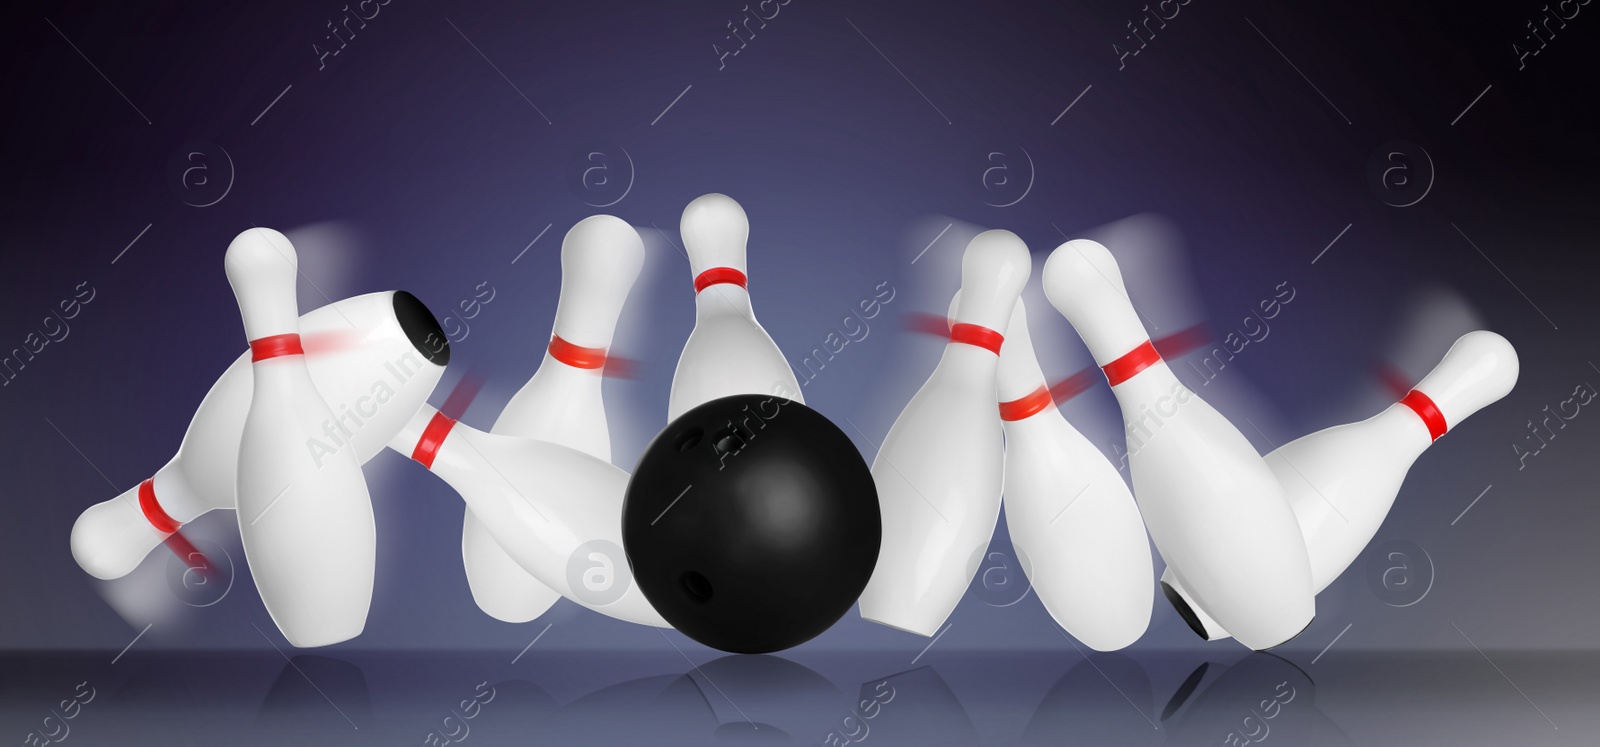 Image of Bowling pins and ball on color background